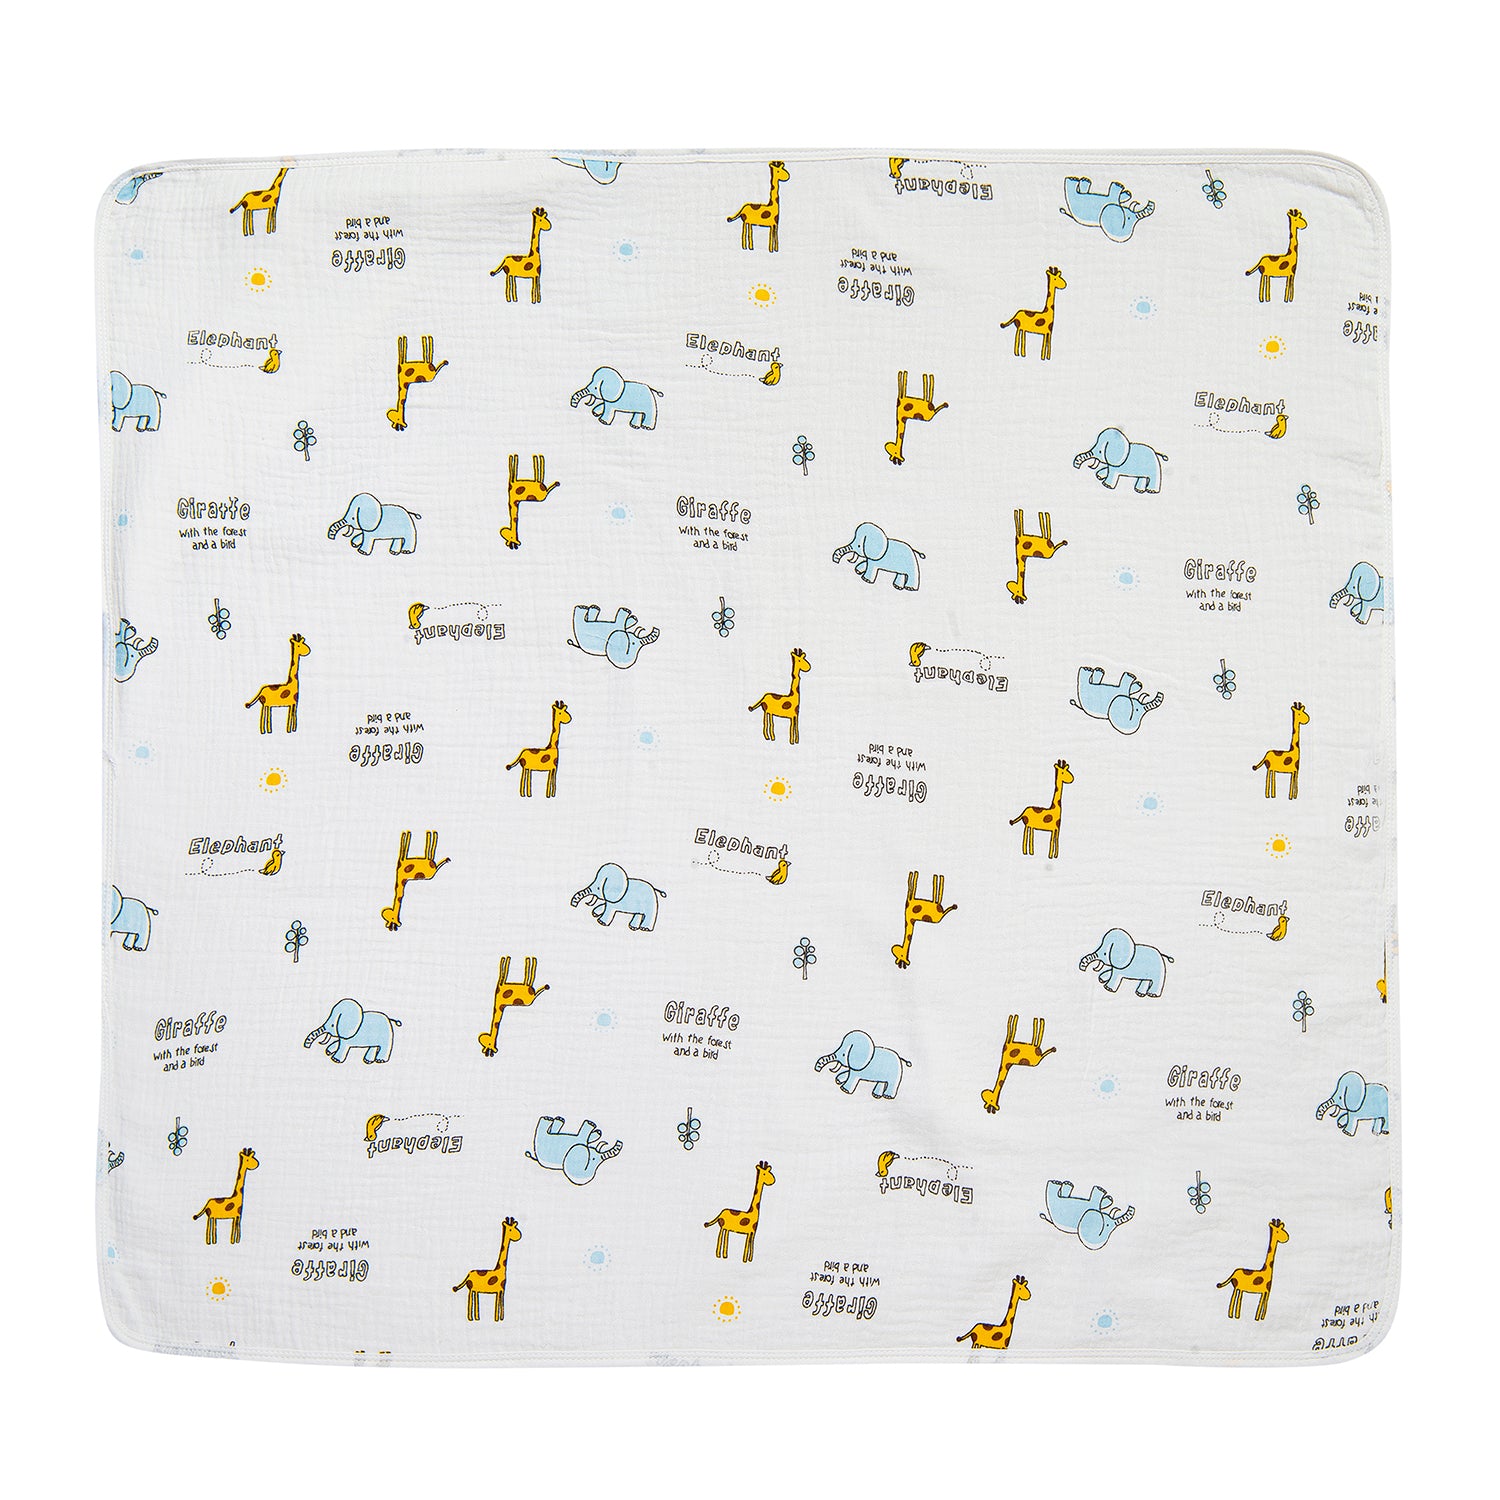 Giraffe And Elephants Cotton Hooded Wrapper White - Baby Moo